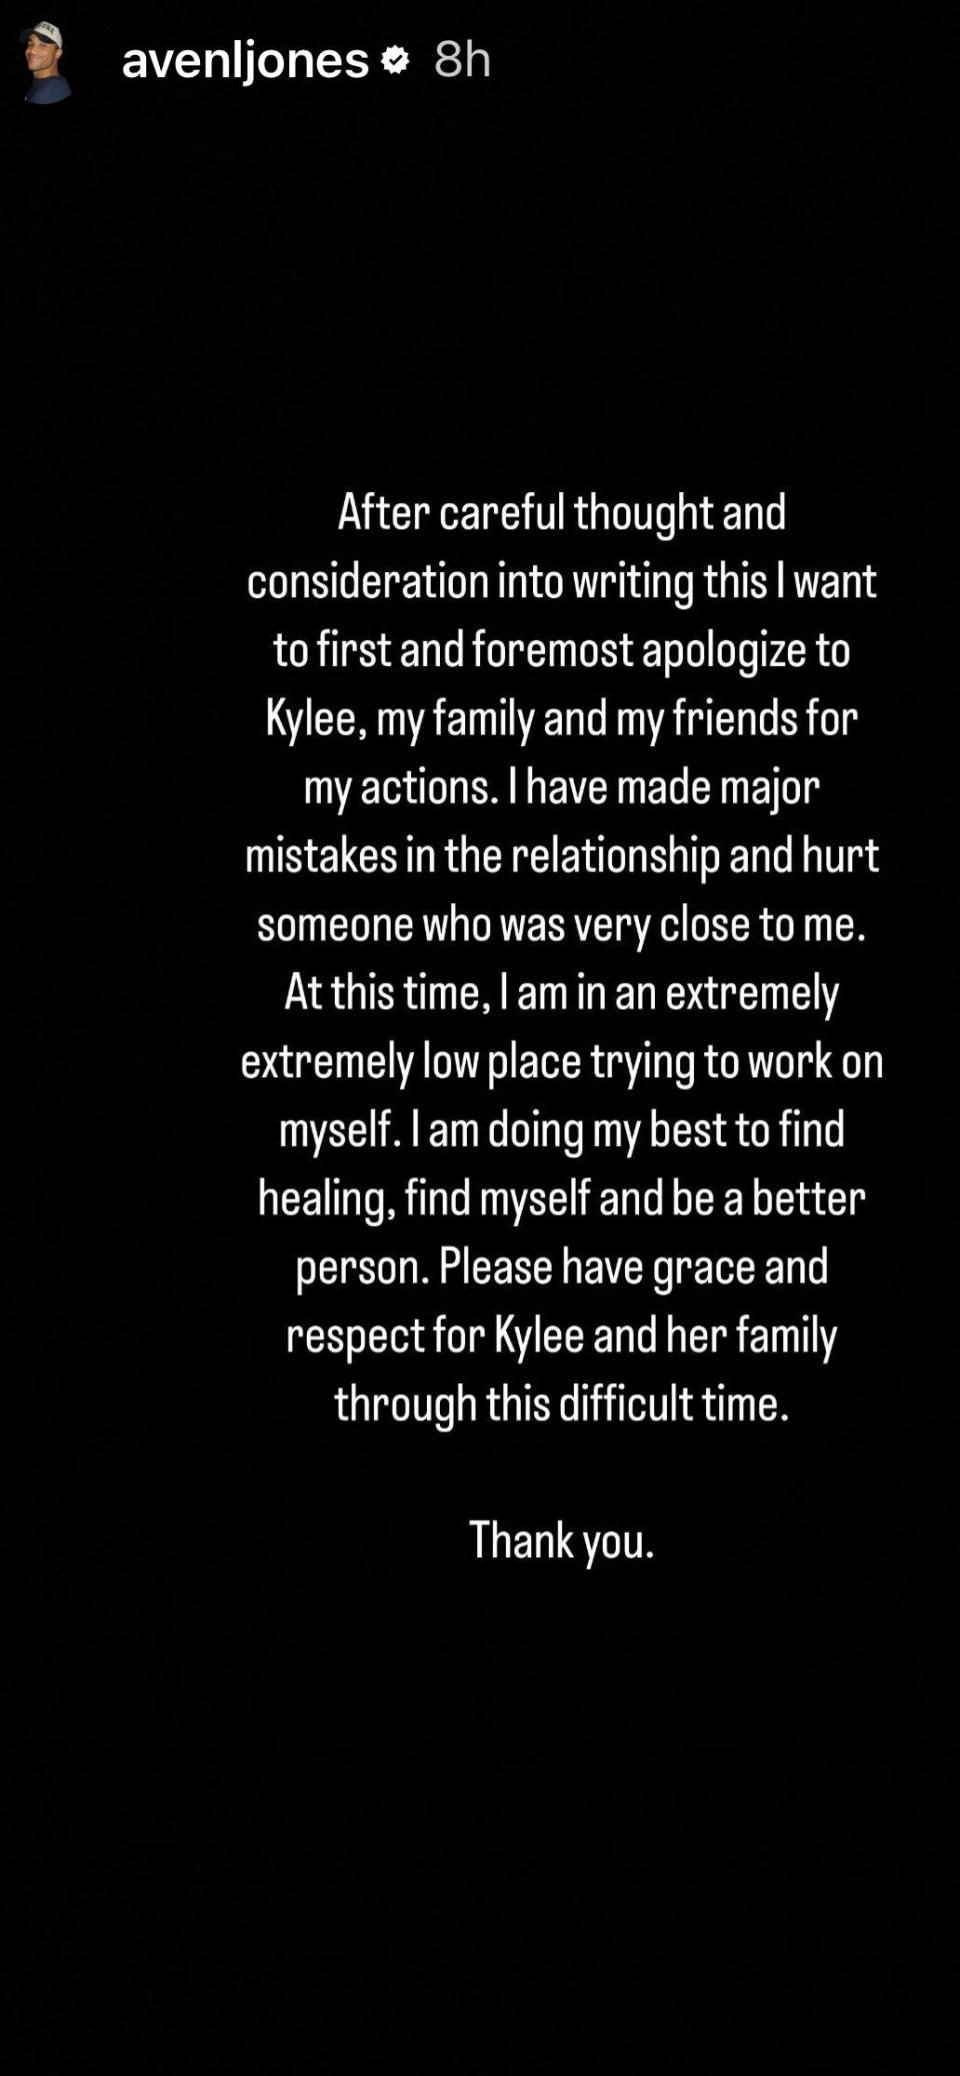 Aven Jones from "Bachelor in Paradise" posts on Instagram about his breakup with Kylee